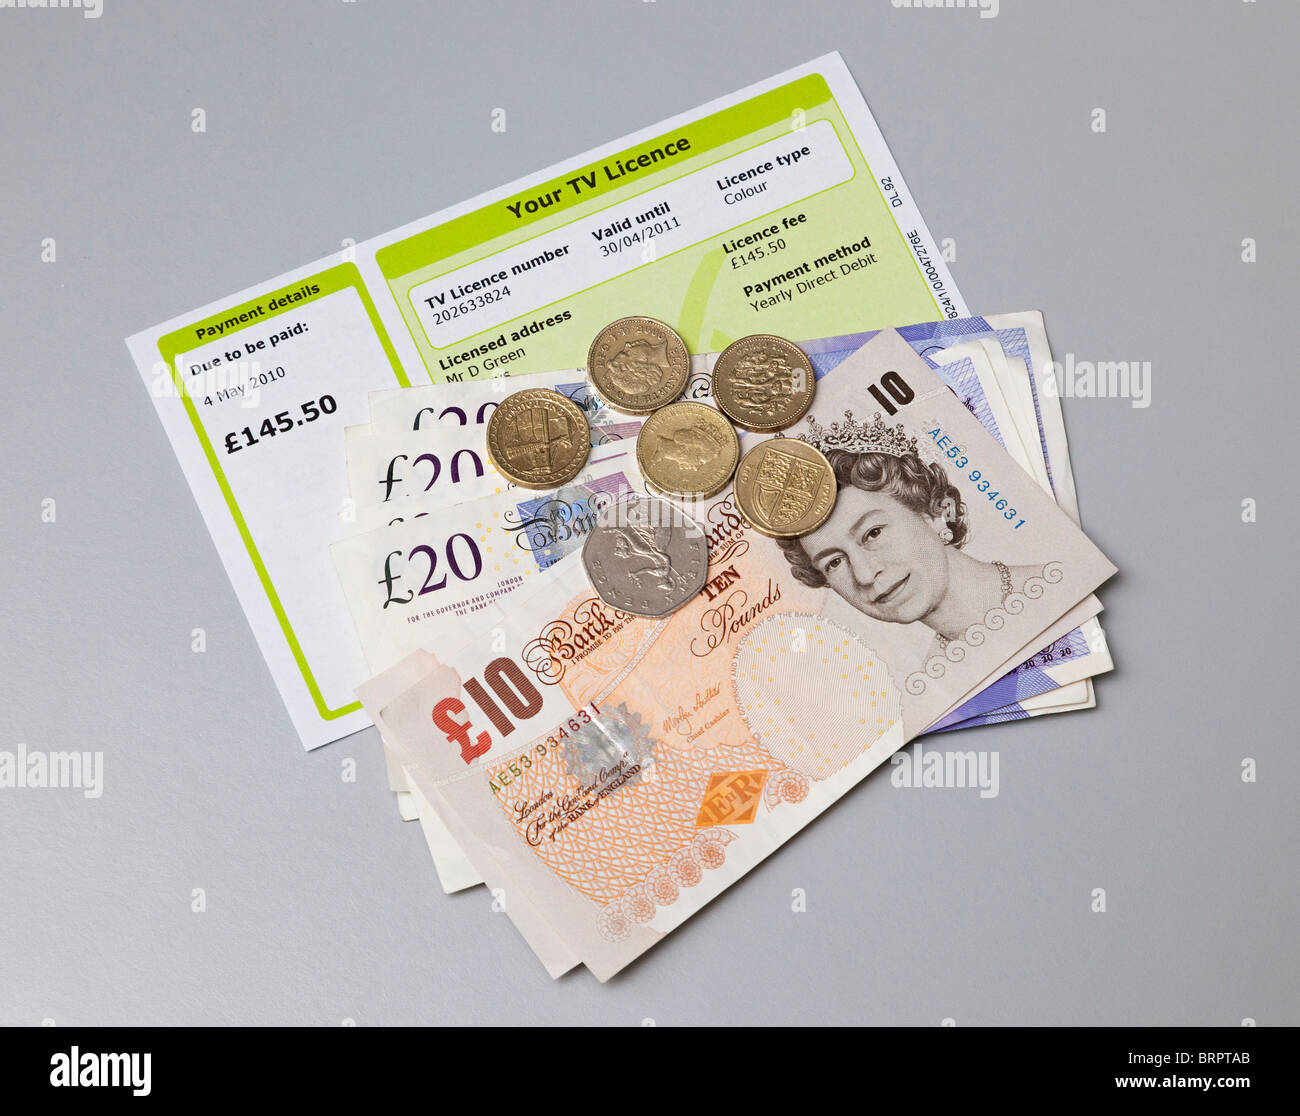 TV licence with cash to pay for it Stock Photo